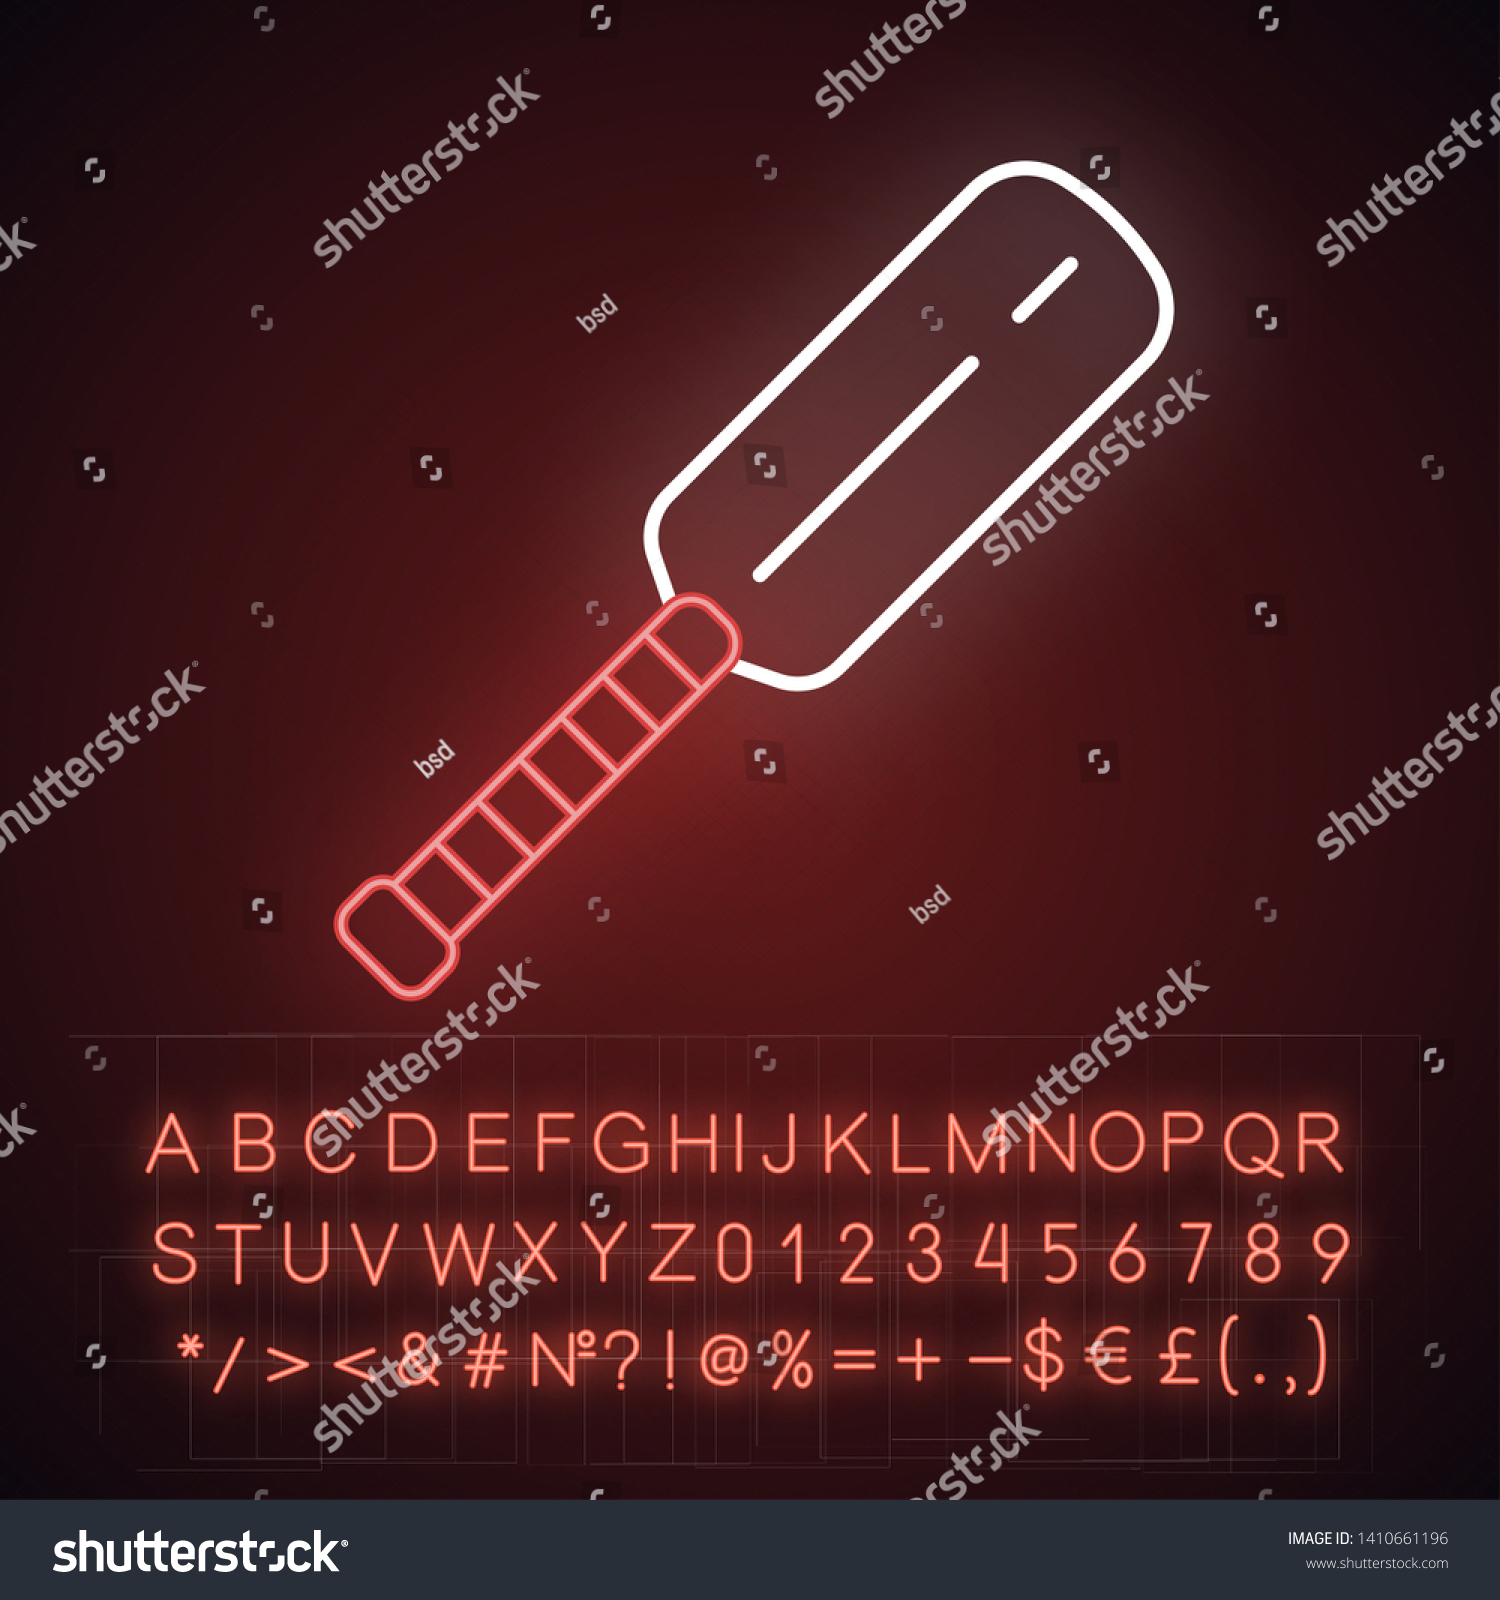 SVG of Cricket bat neon light icon. Equipment for batsmen. Wooden flat block with long handle. Sports accessory. Game gear. Glowing sign with alphabet, numbers and symbols. Vector isolated illustration svg